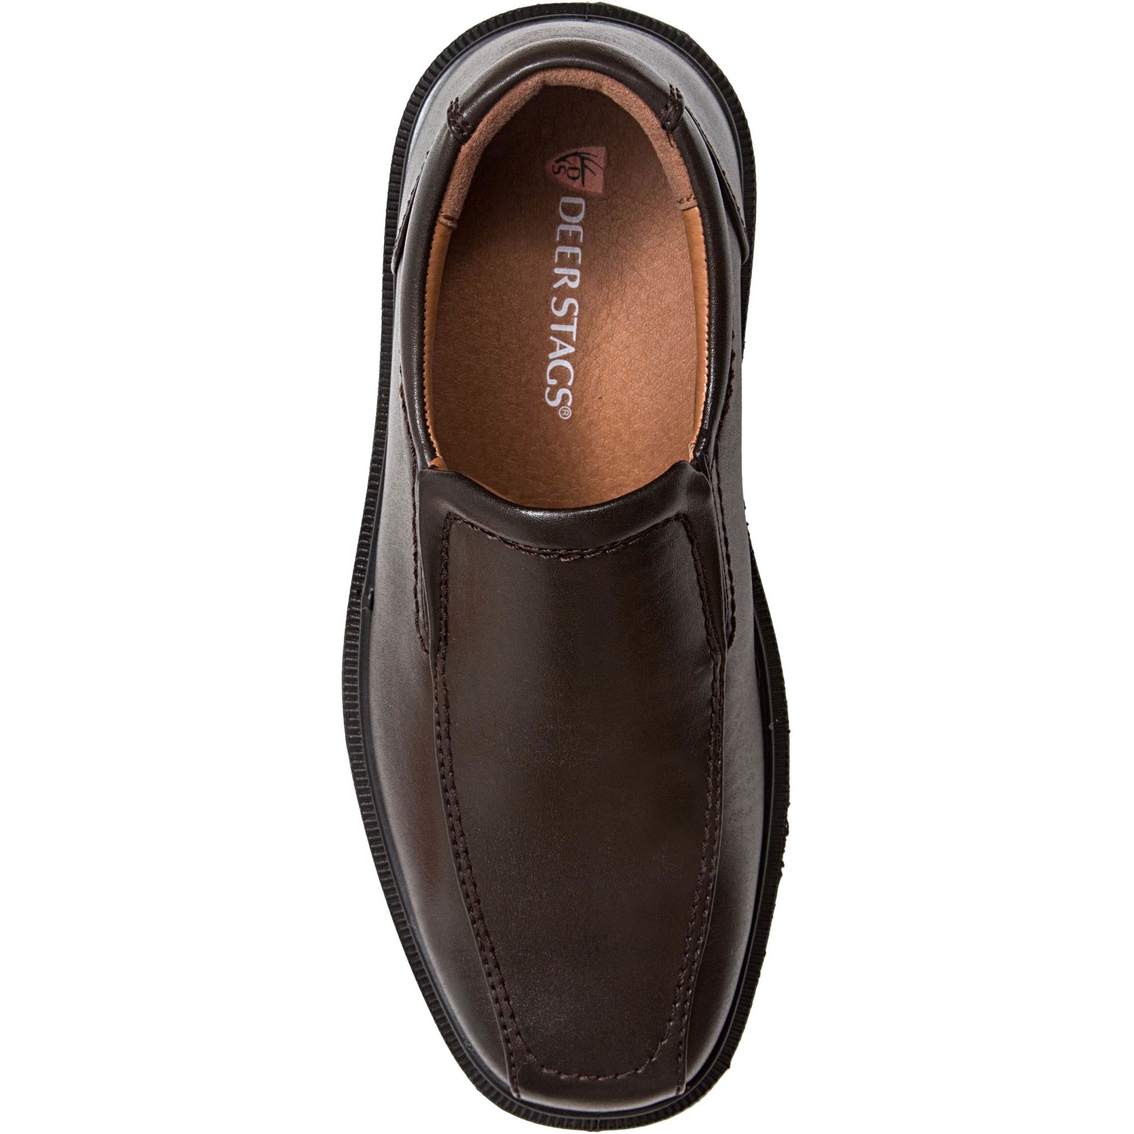 Deer Stags Boys Greenpoint Jr. Slip On Dress Shoes - Image 5 of 6